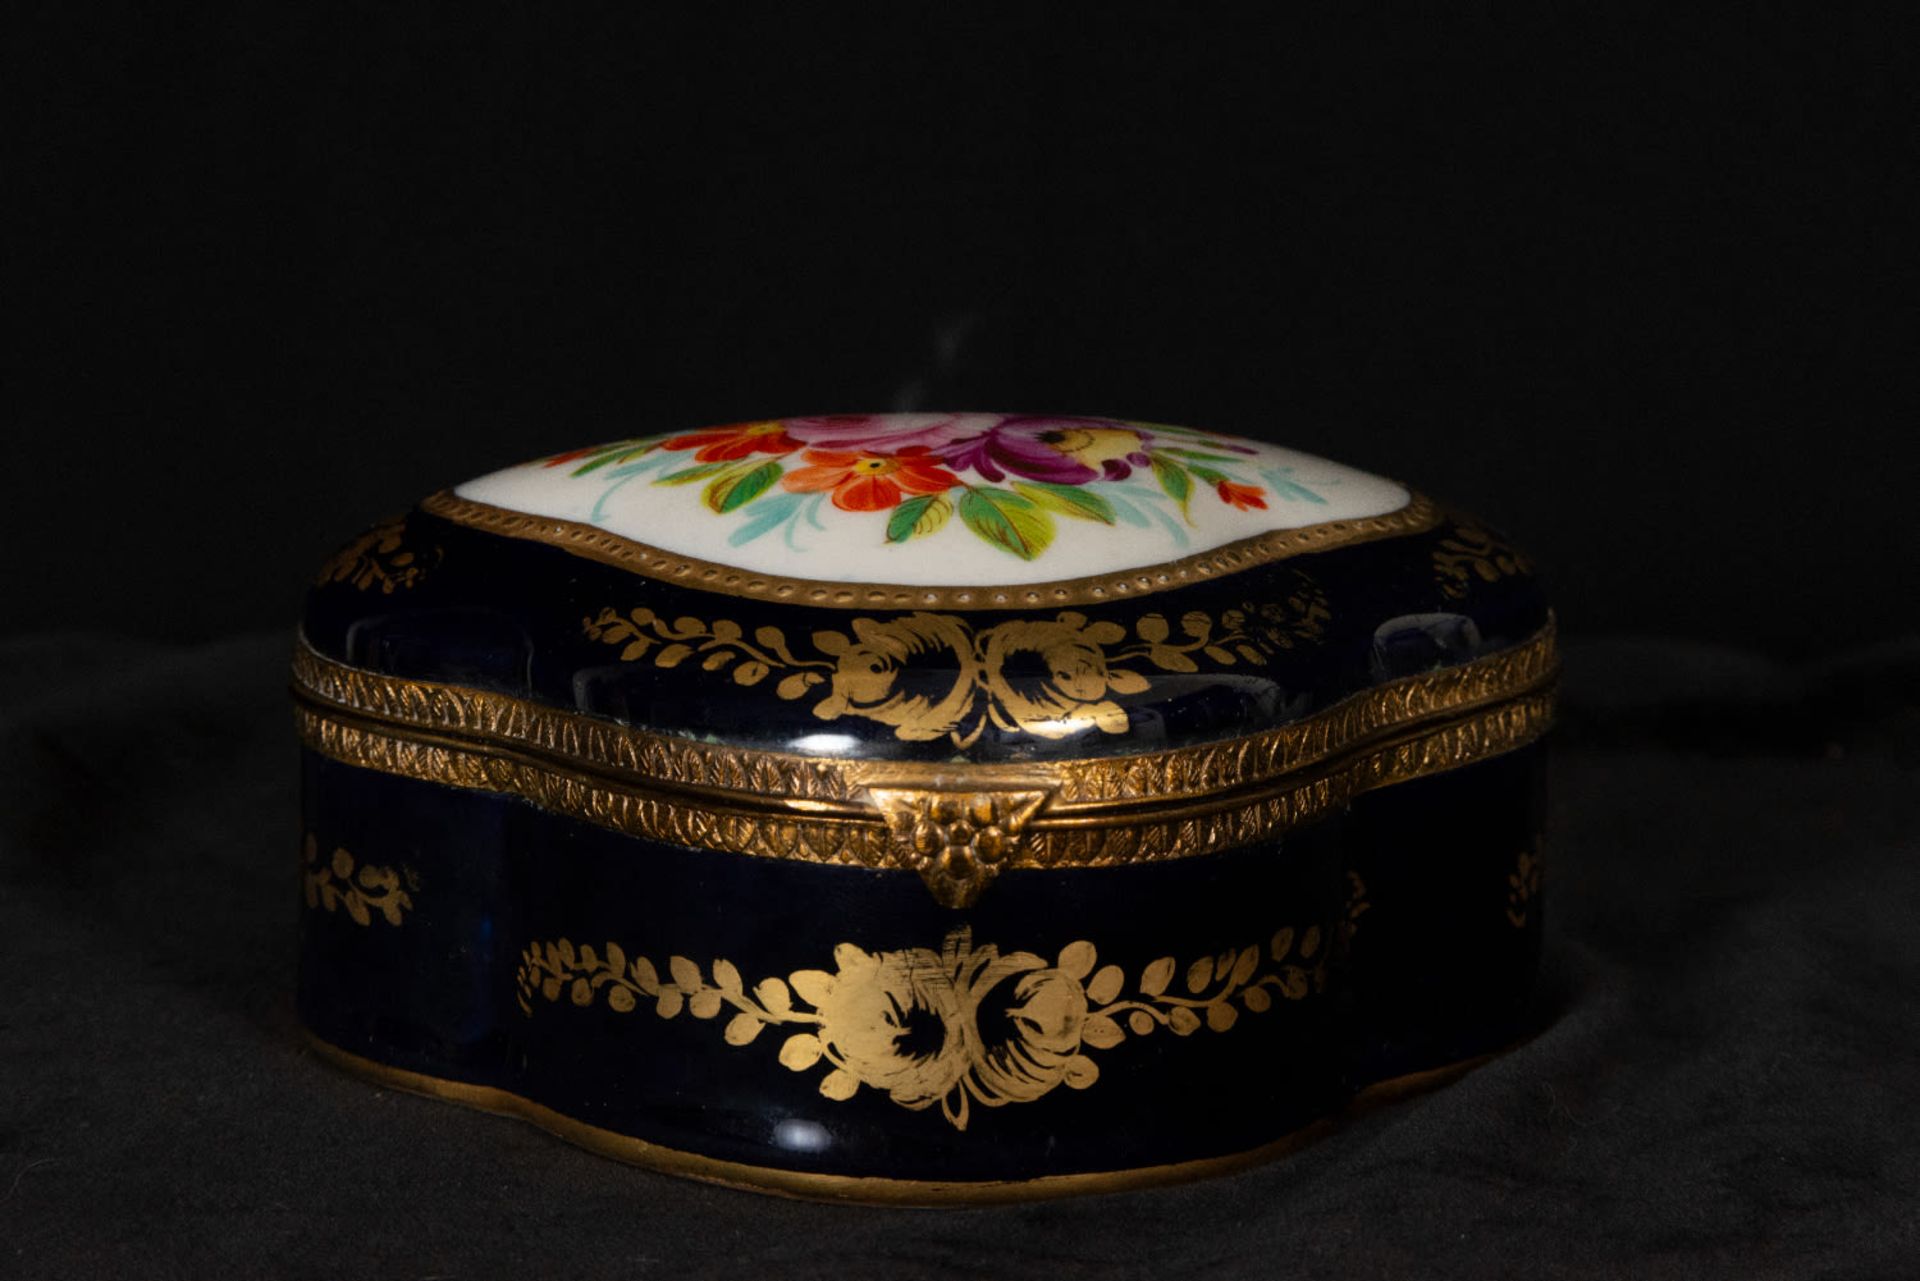 Pair of Sèvres porcelain dressing table jewelry boxes and porcelain swan, 19th century - Image 3 of 10